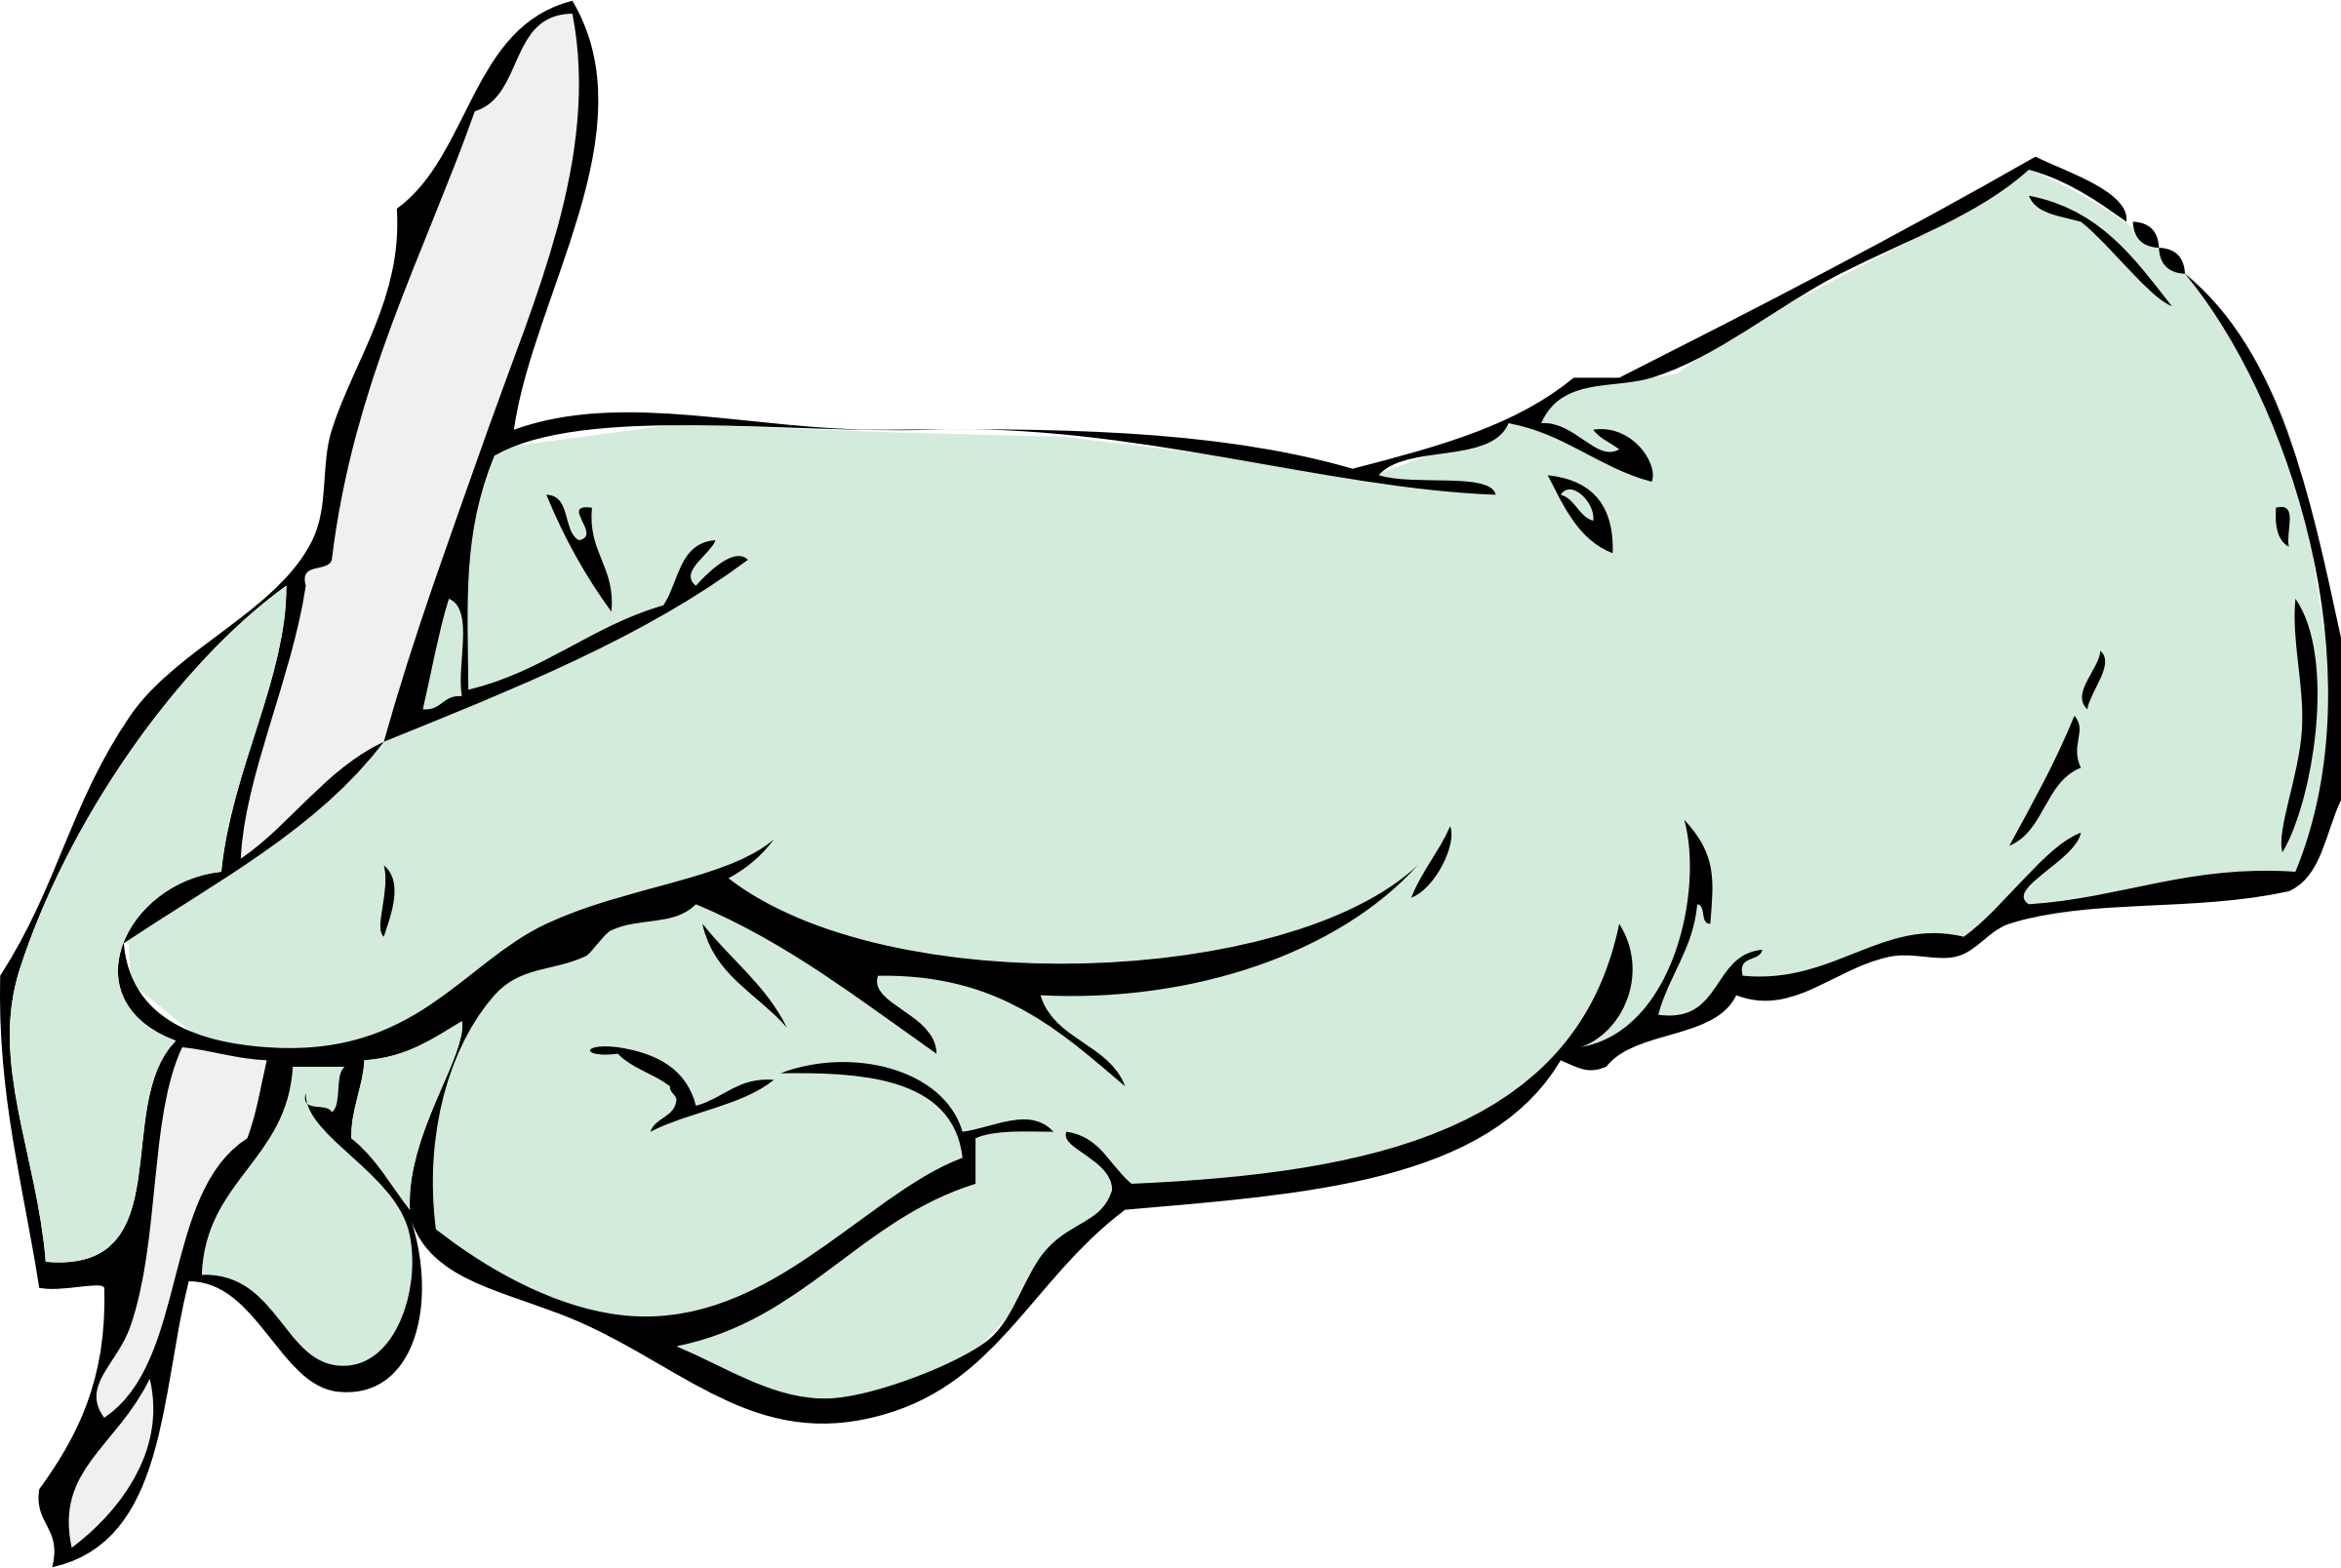 Gloved hand with scalpel. Shot clipart surgeon tool